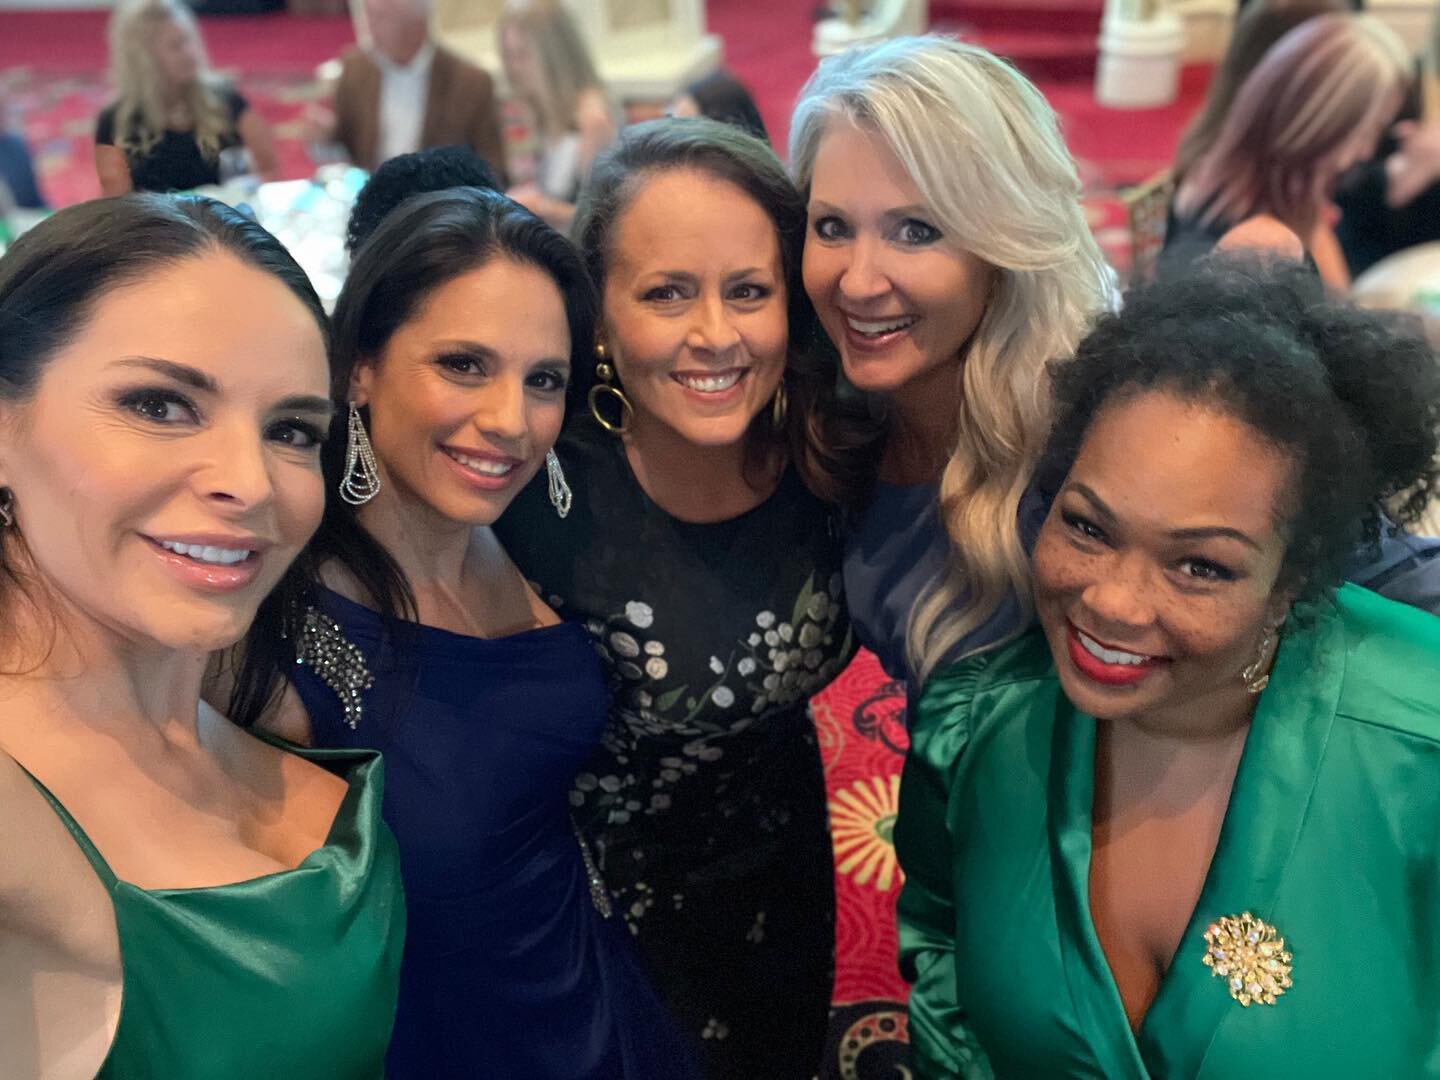 Besties are the best.💚

Thoroughly enjoyed every minute of the @girlscoutsnv Dessert Before Dinner gala last night. So good to see and embrace so many good people, and to celebrate some really amazing women in our community! 💚

#dessertbeforedinner